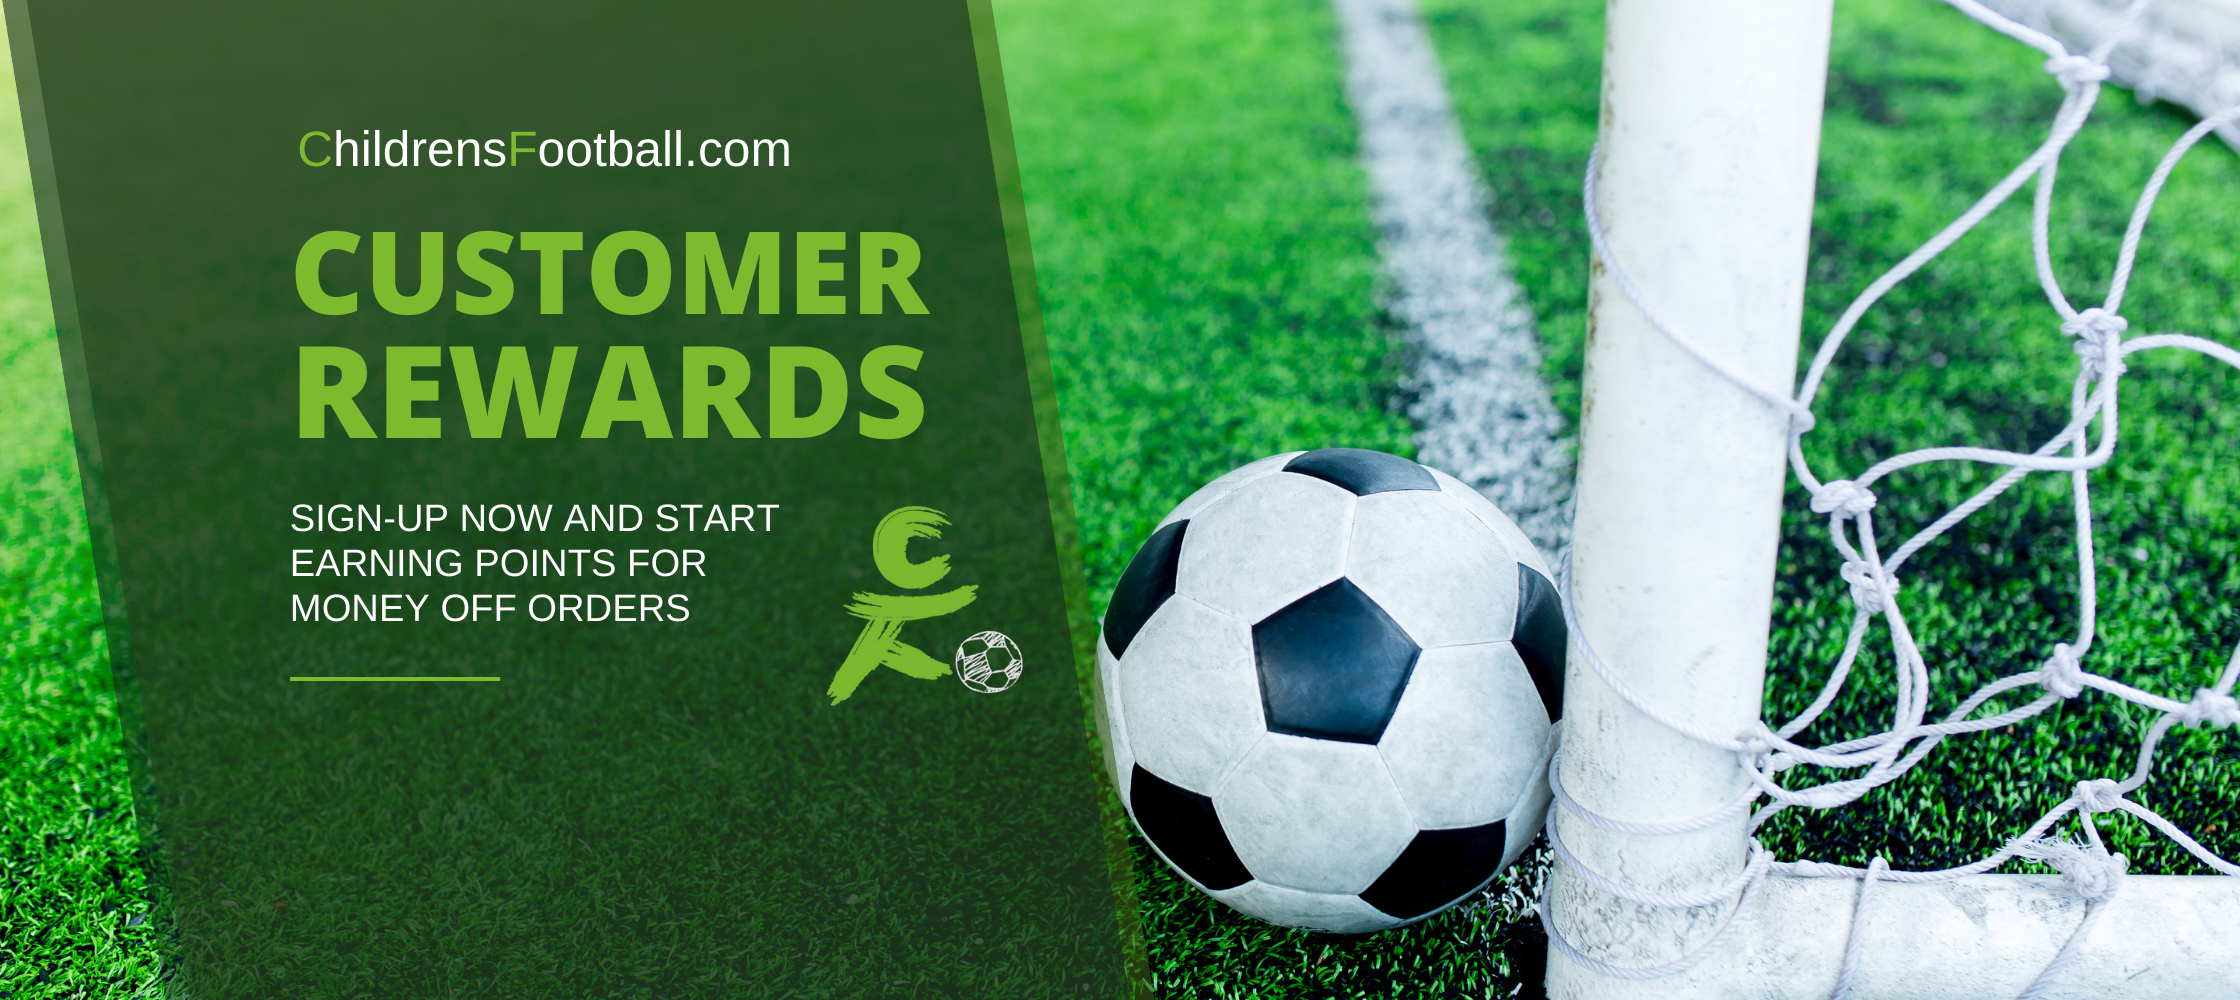 Introducing customer rewards - earn points for money off orders